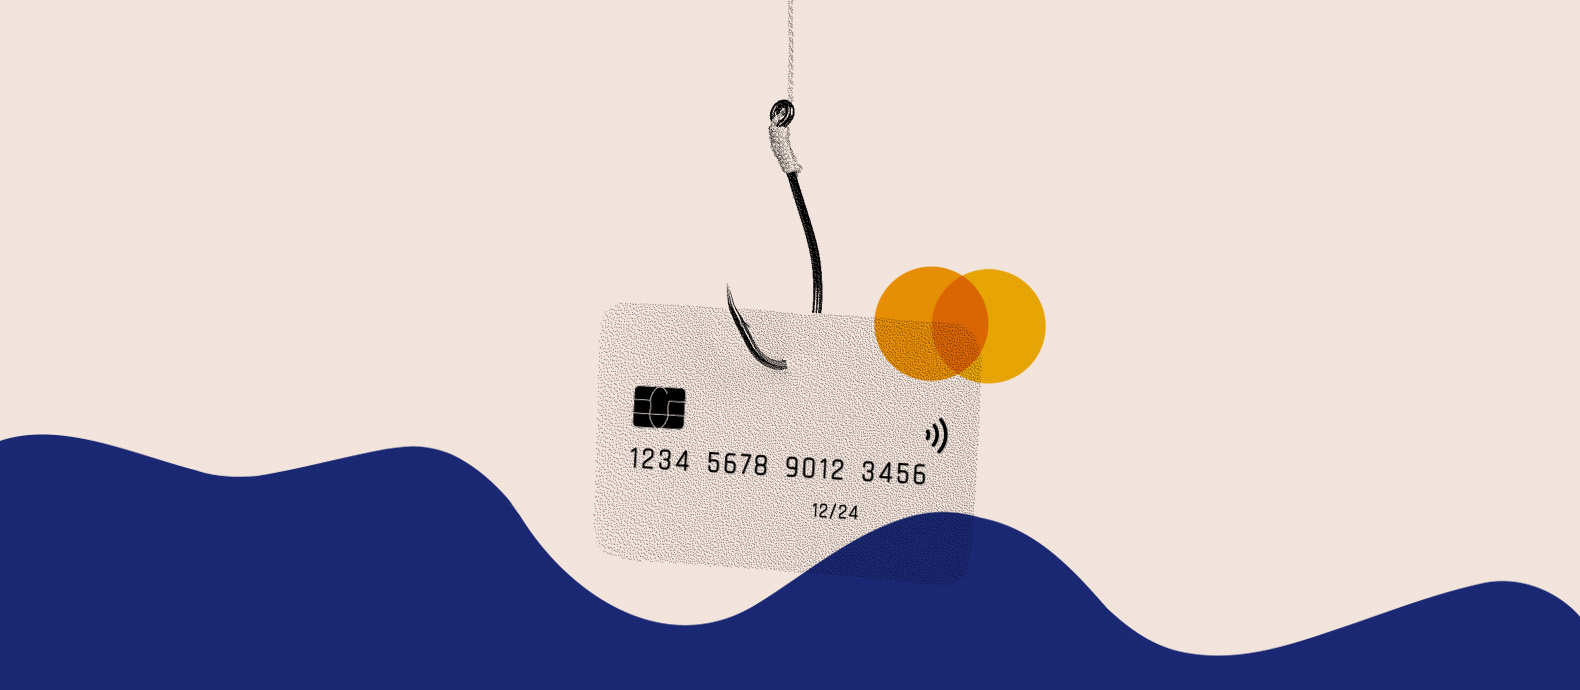 Top 6 actions companies should take for phishing protection